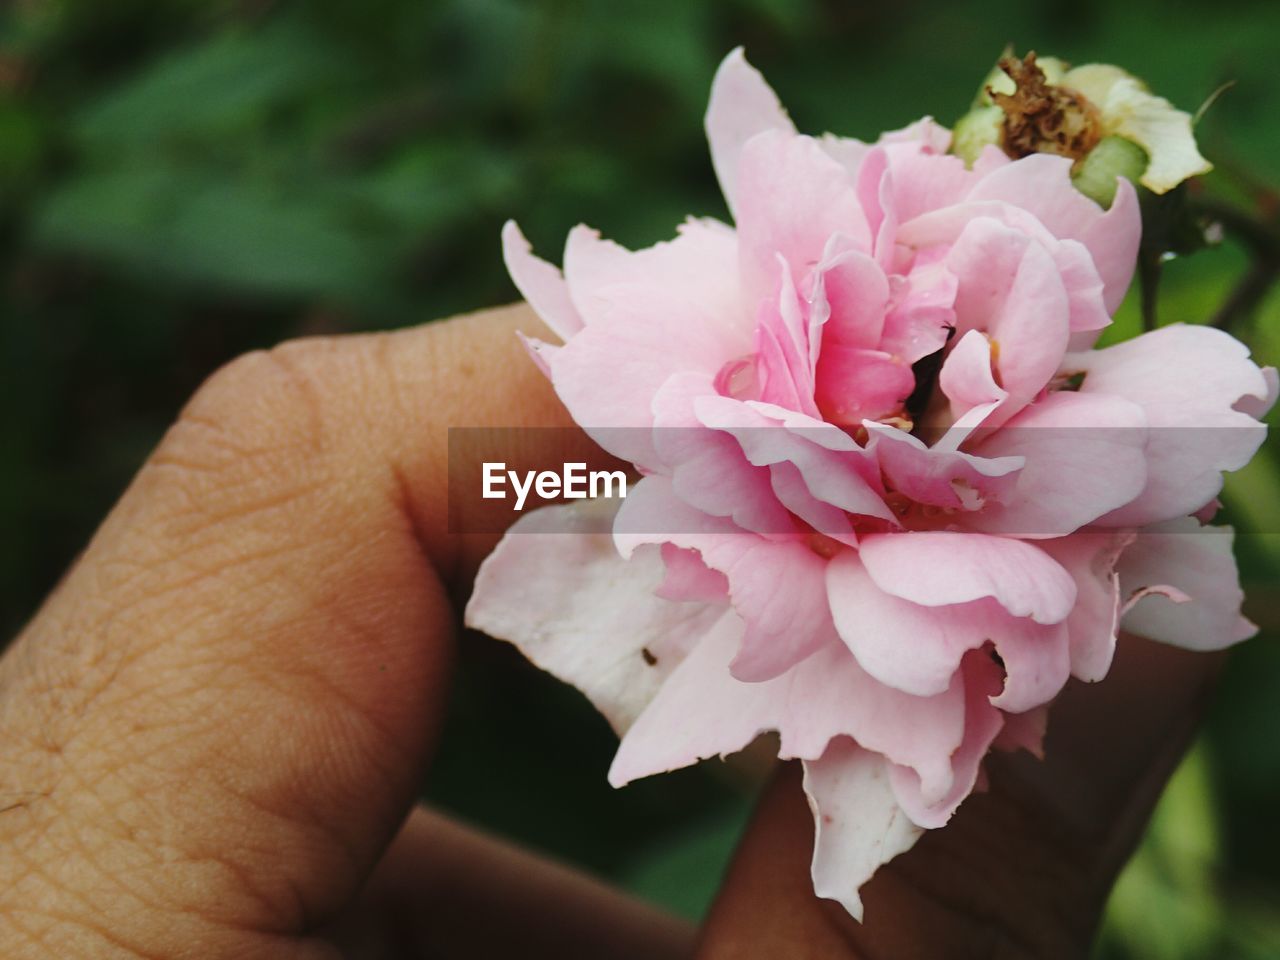 CLOSE-UP OF HAND HOLDING PINK FLOWERS